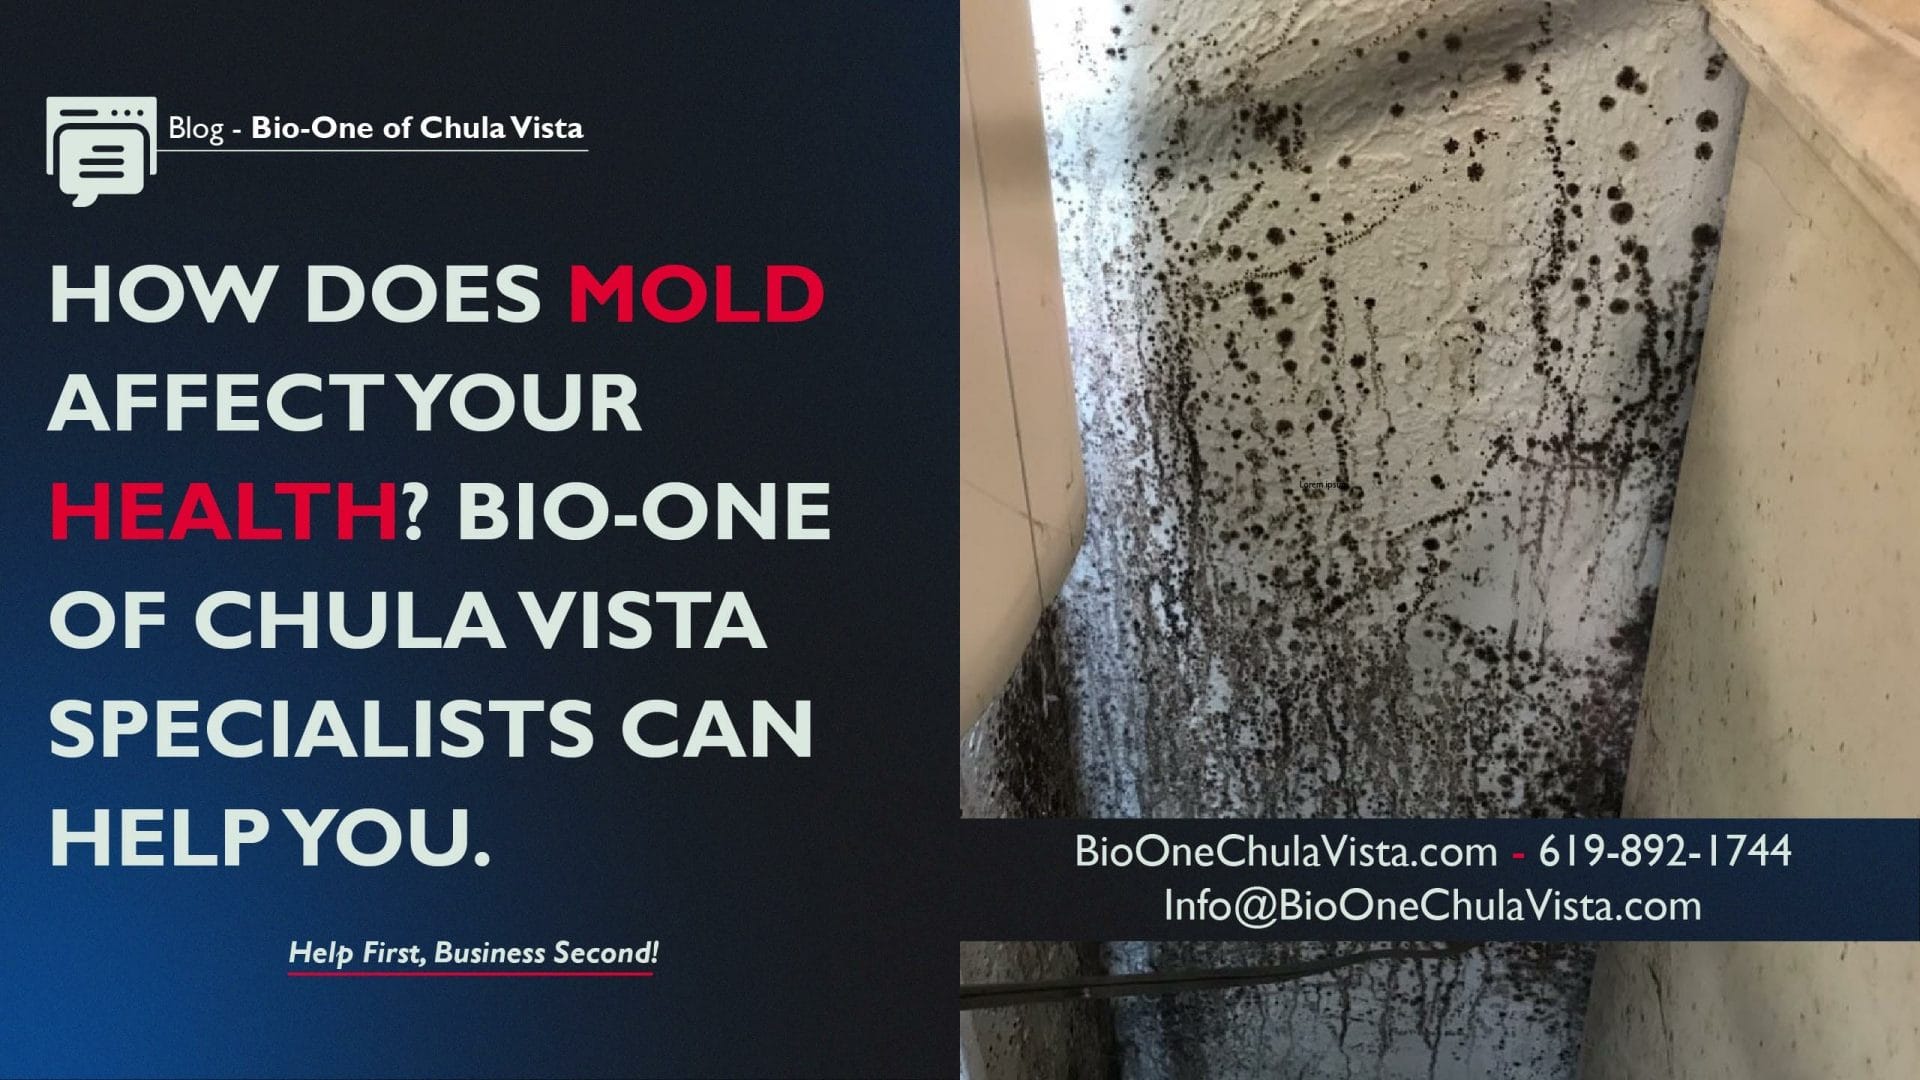 How does mold affect your health? Bio-One of Chula Vista specialists can help you.